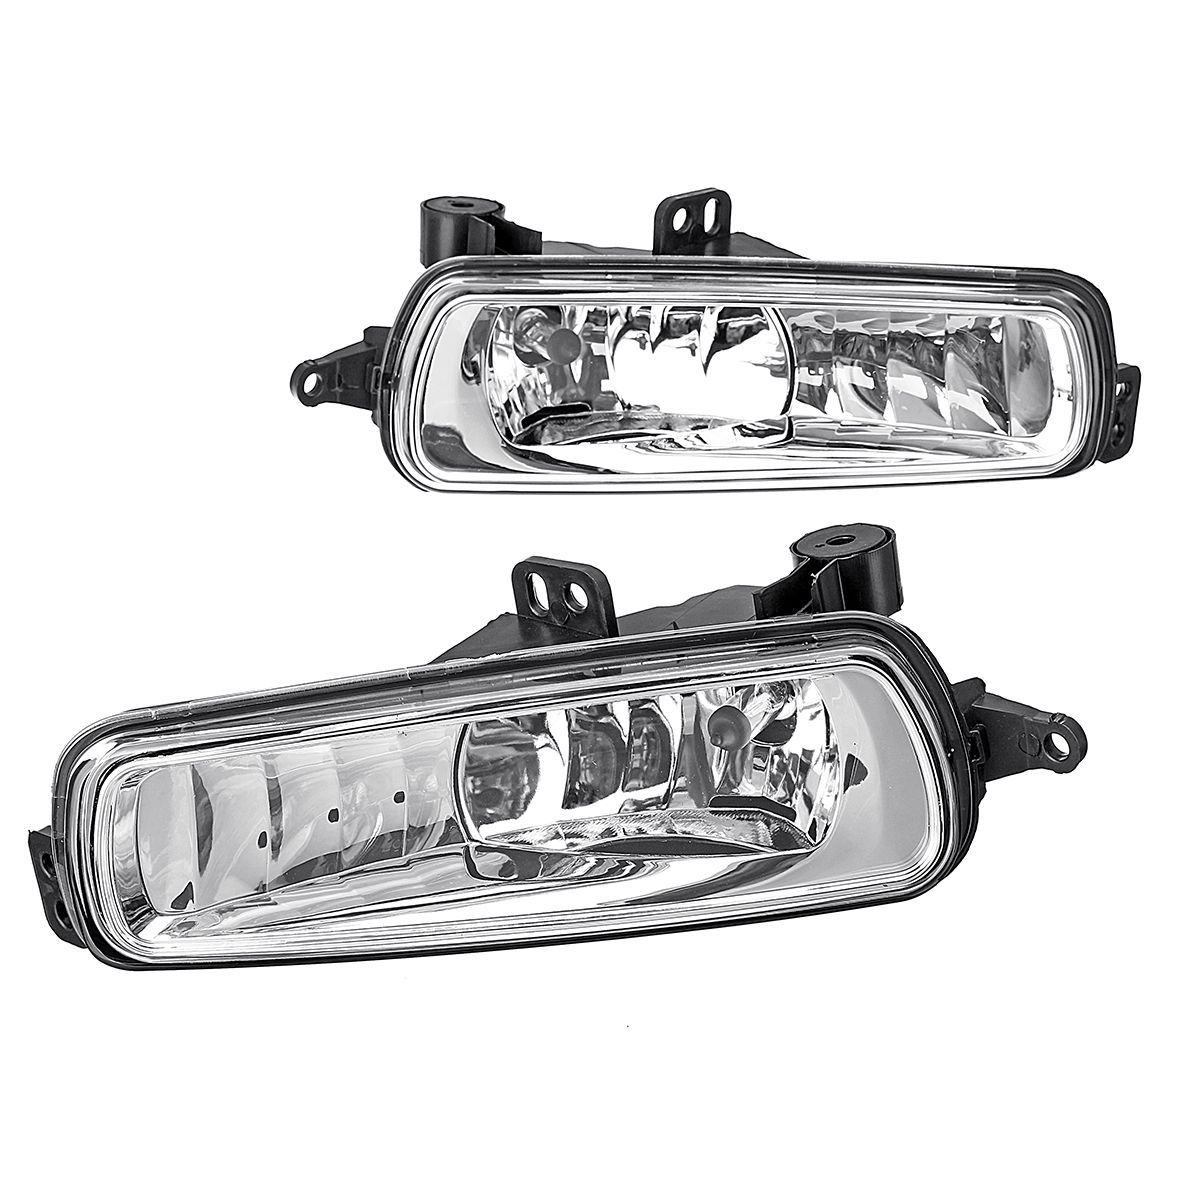 Pair-Car-Front-Bumper-Fog-Lights-Lamp-Cover-Grille-With-Bulbs-Amber-for-Ford-Focus-2015--2017-1382863